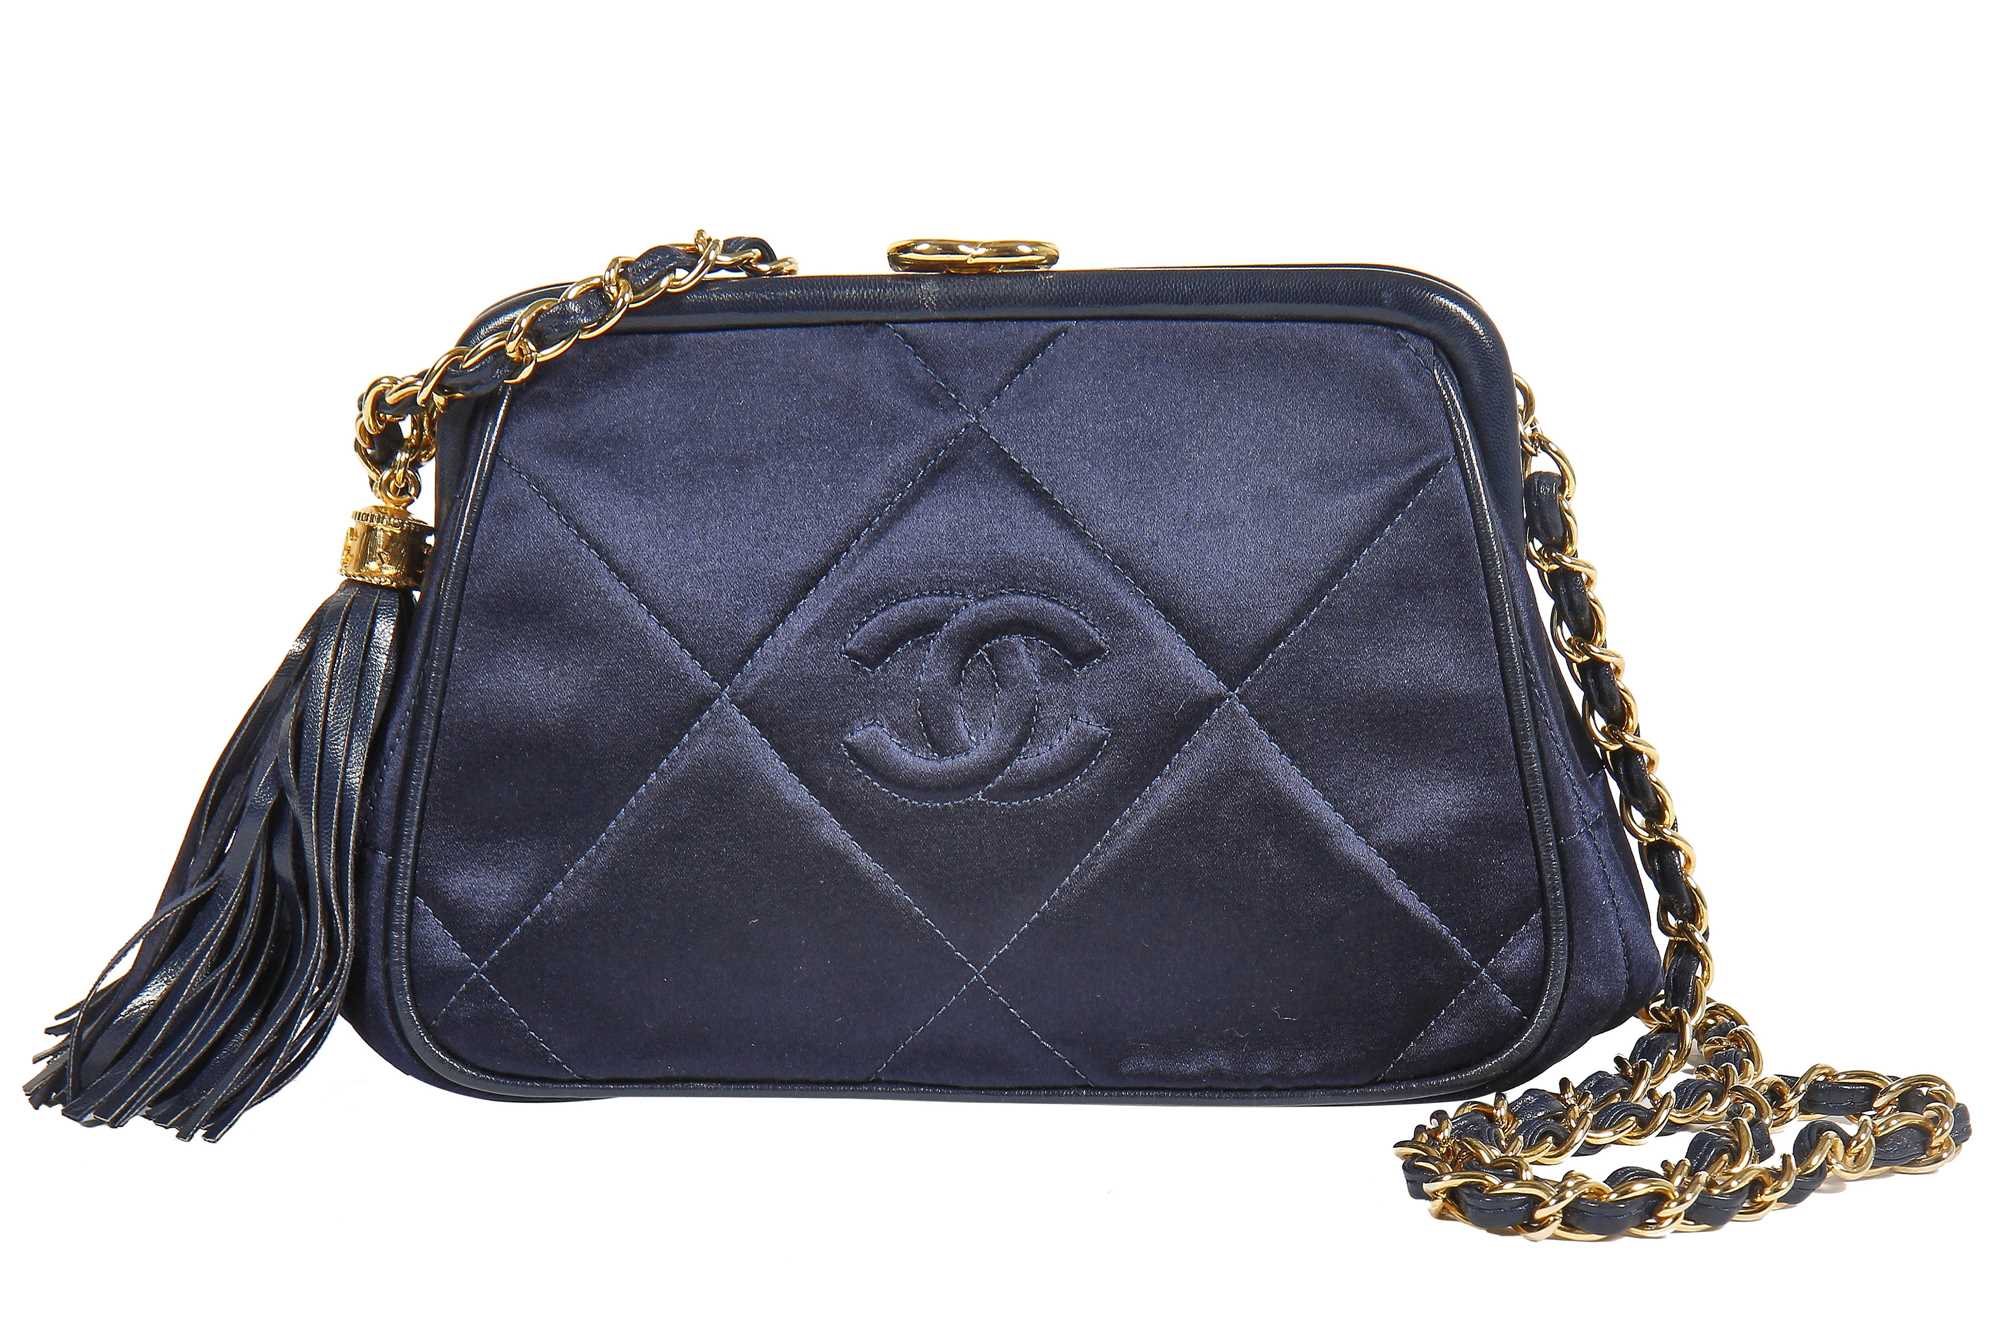 Lot 5 - A Chanel quilted midnight-blue satin evening